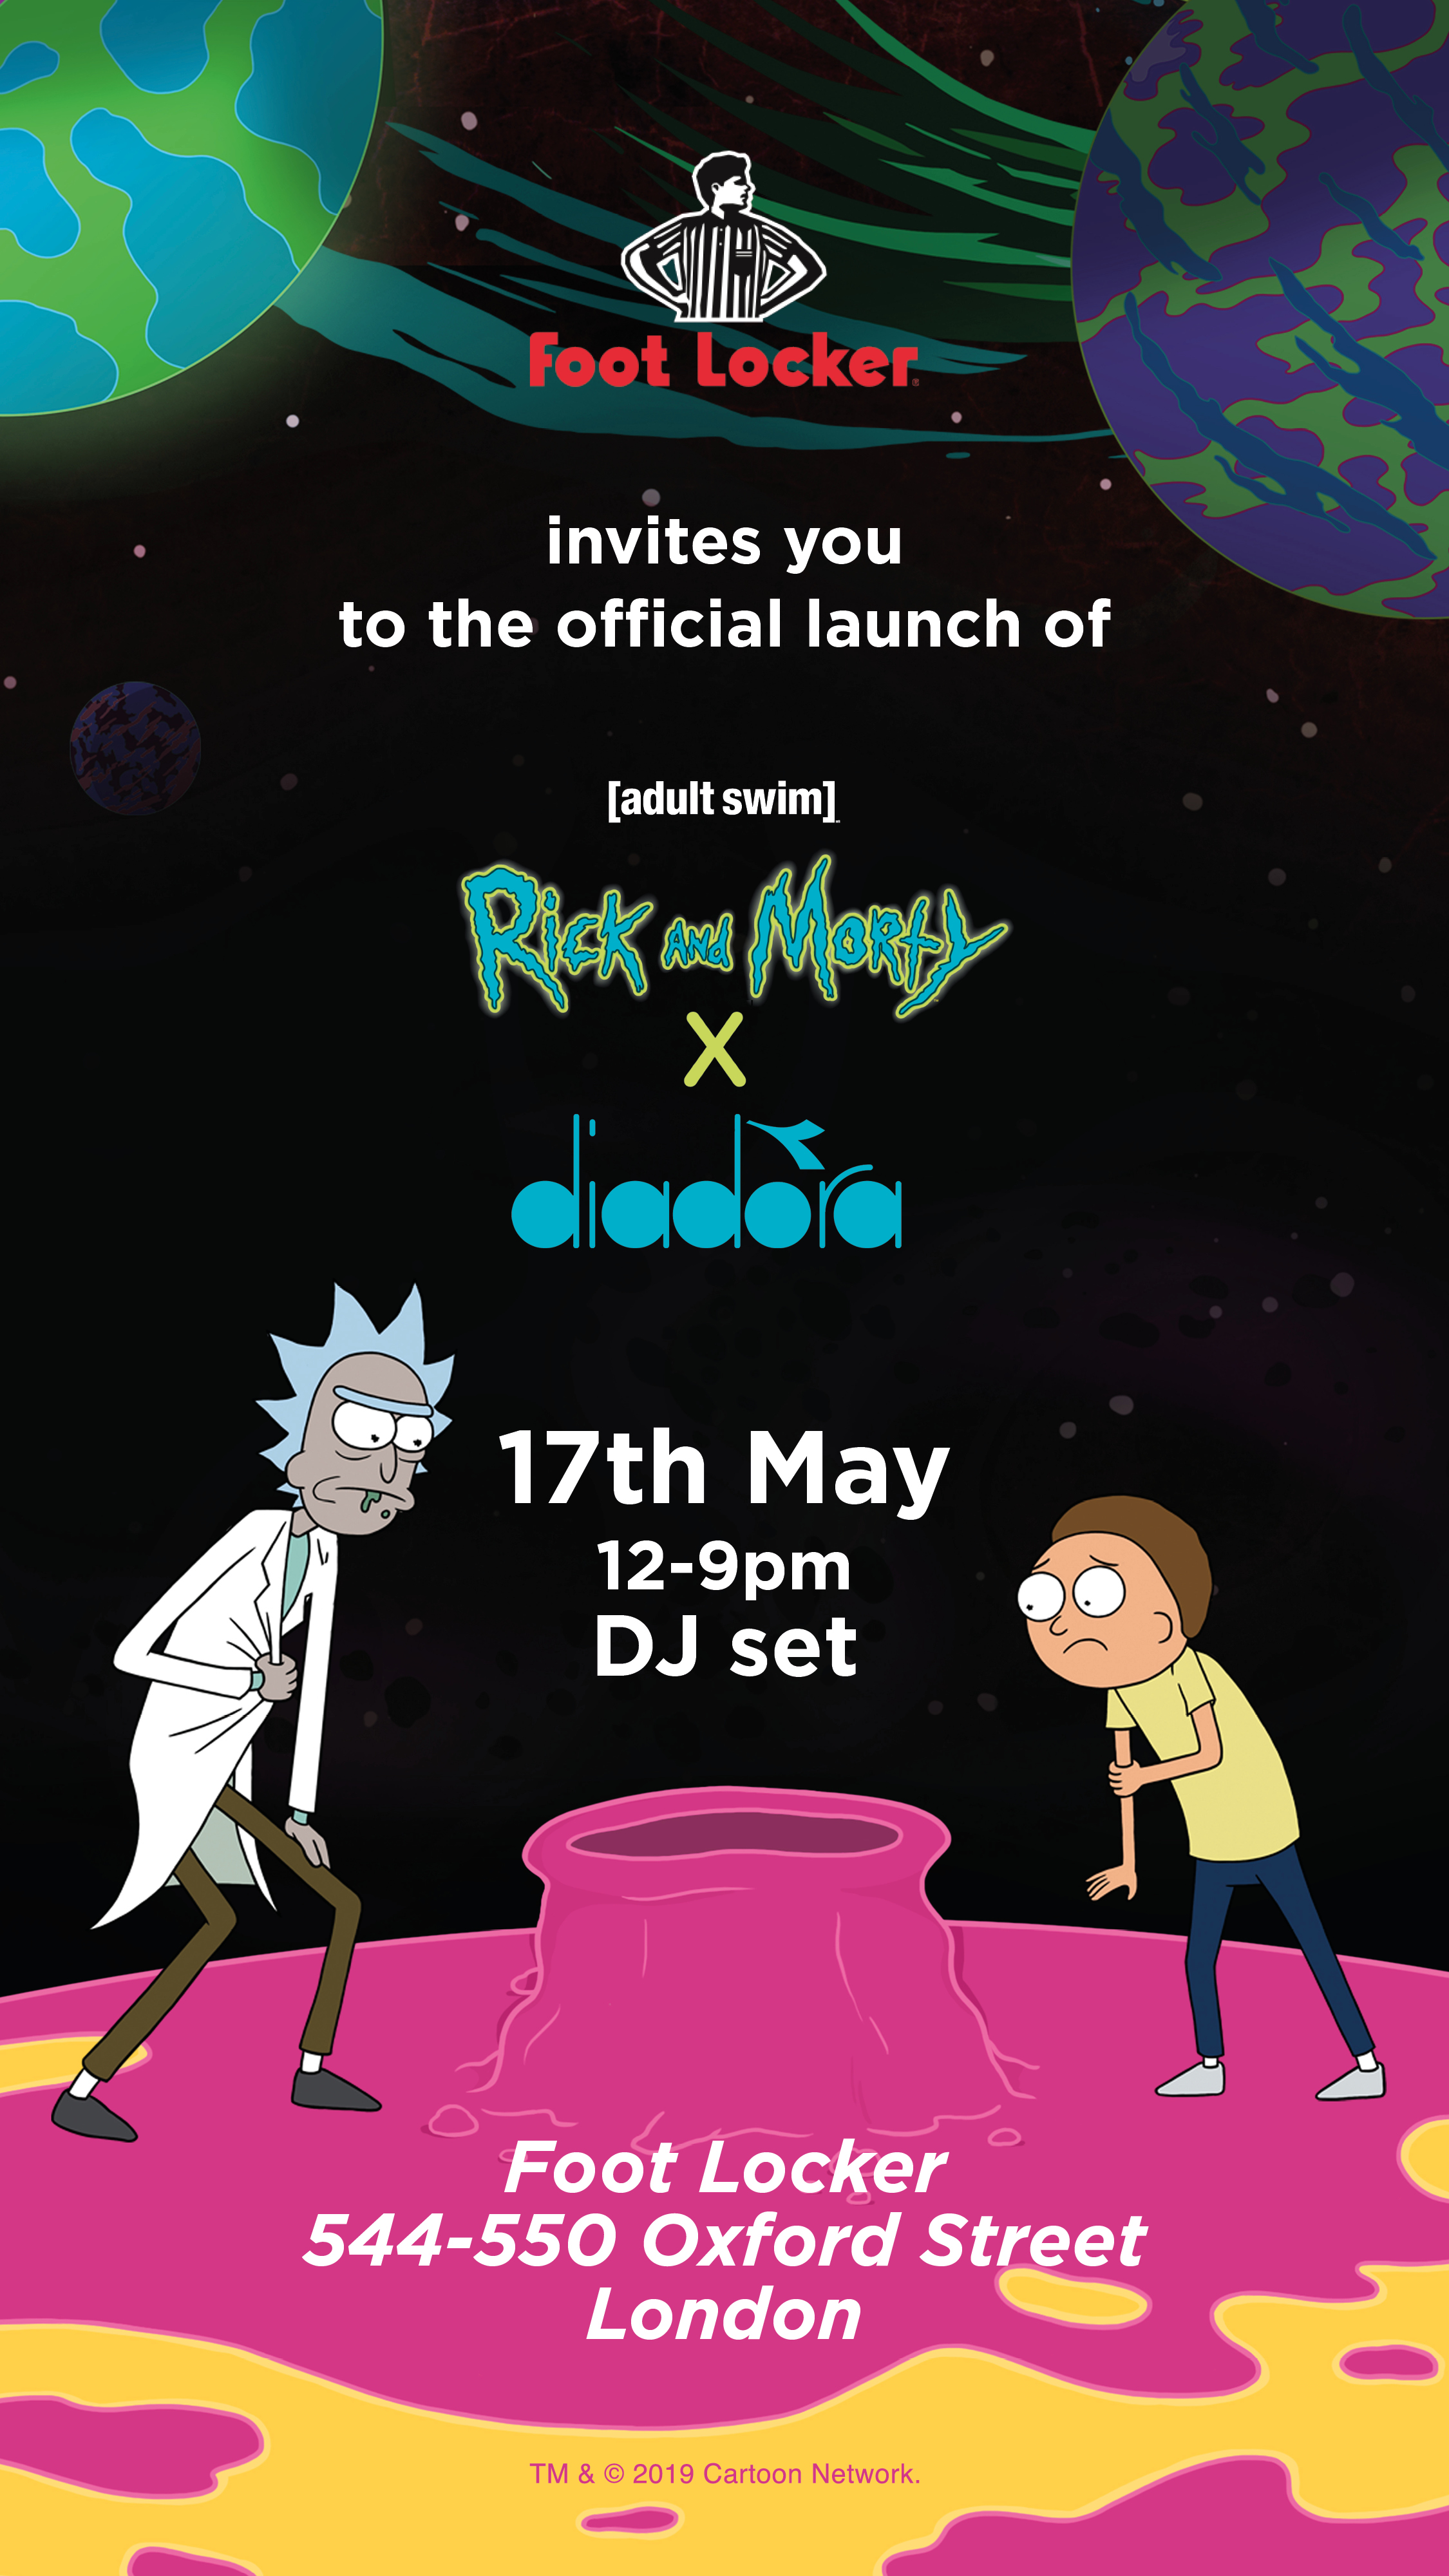 The Diadora x Rick and Morty Collection Launches in Foot Locker, London Tomorrow